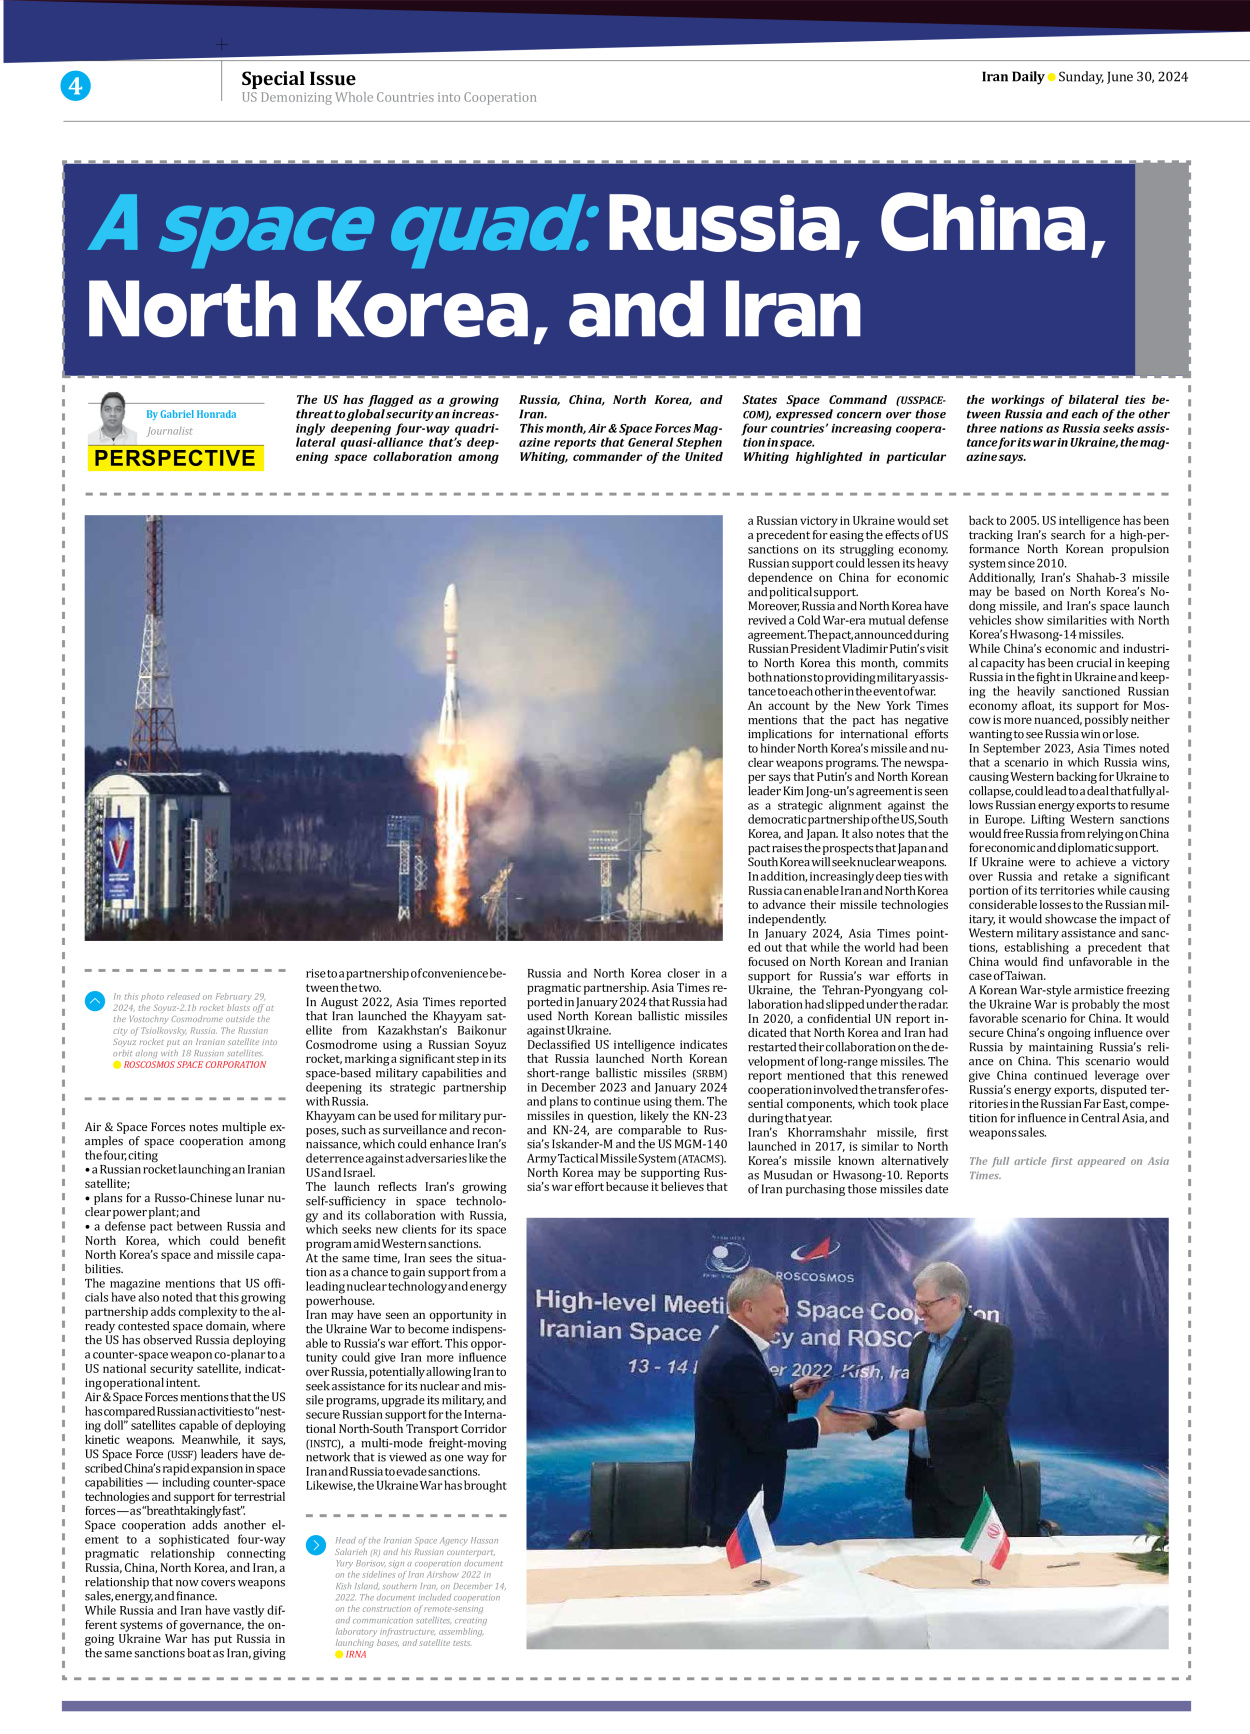 Iran Daily - Number Seven Thousand Five Hundred and Ninety Two - 30 June 2024 - Page 4